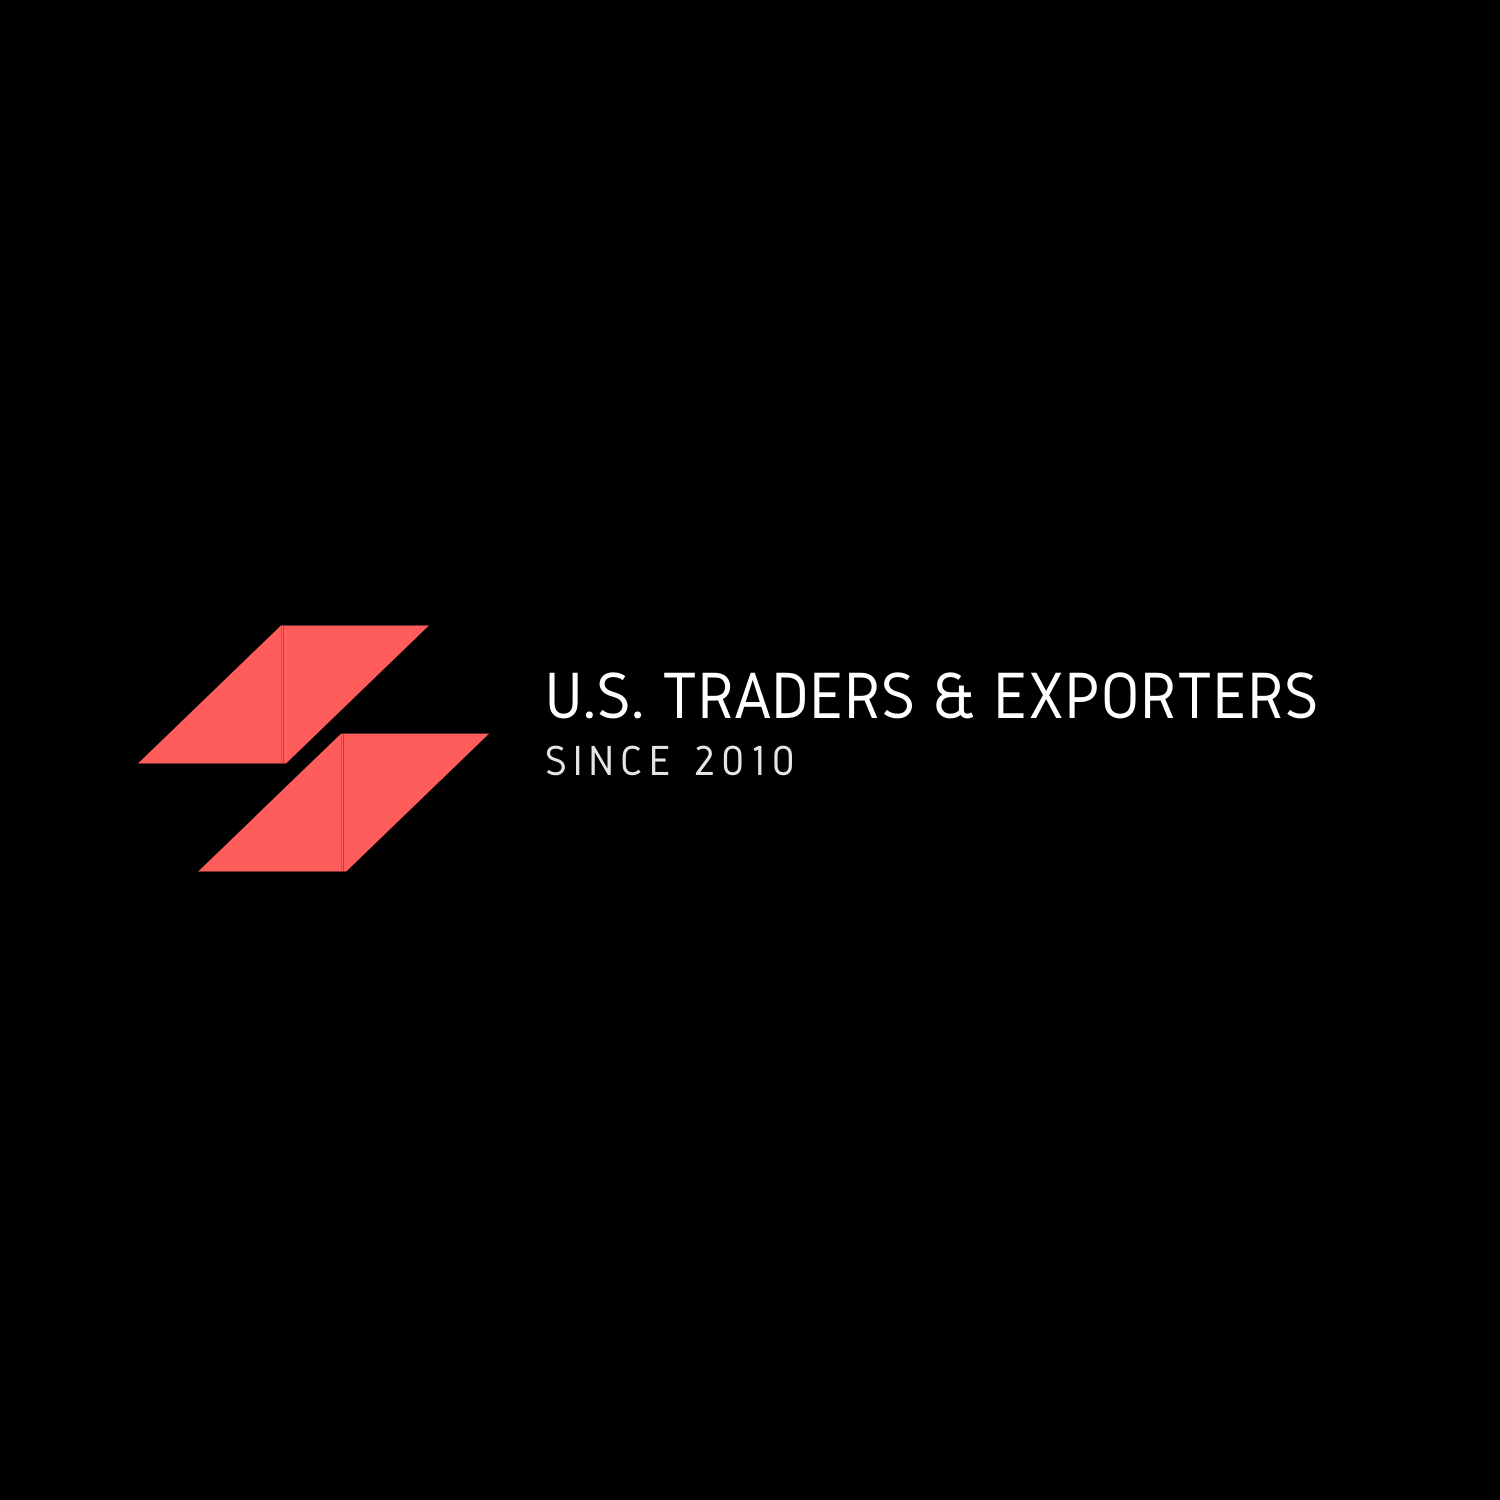 US Traders & Exporters